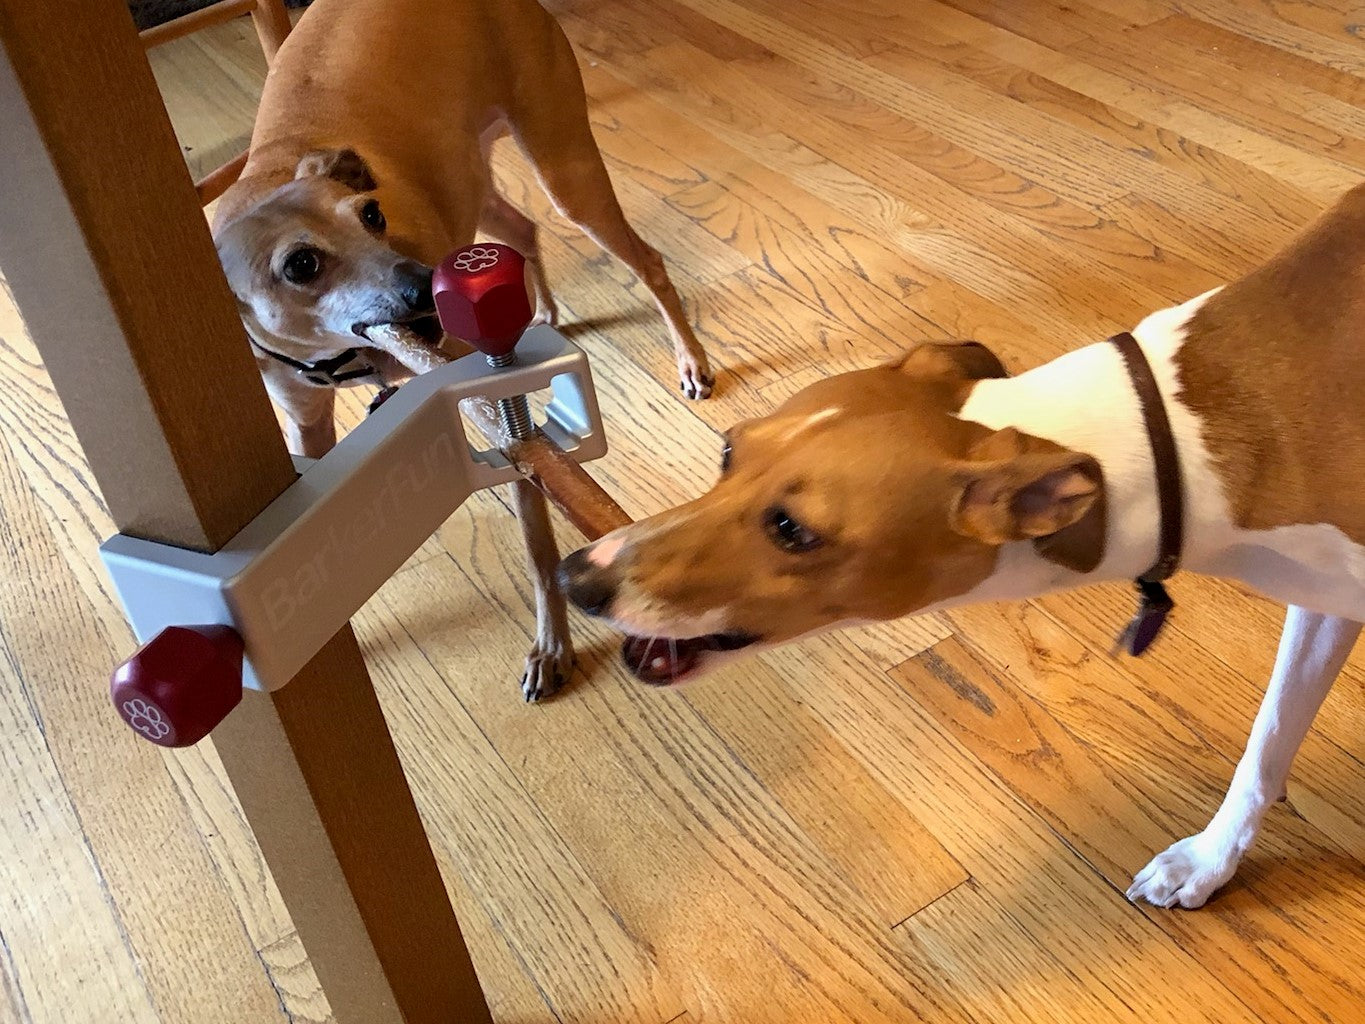 Treat Clincher attached to a table leg with a bully stick and two Italian Greyhounds sharing the bully stick.